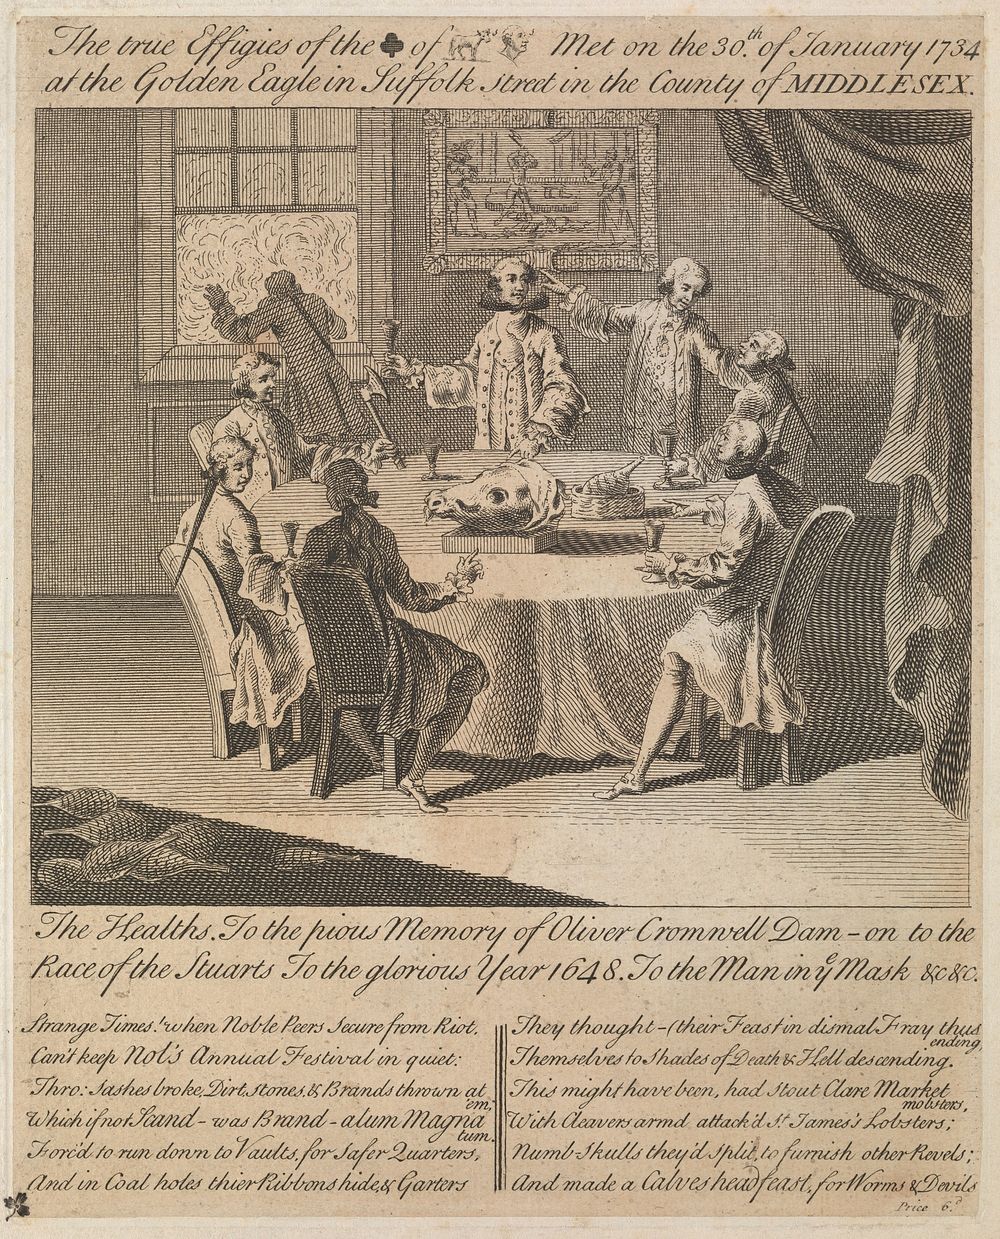 A meeting of a Calves-Head Club for Whig gentlemen who celebrate the execution of King Charles I. Engraving, 1734.